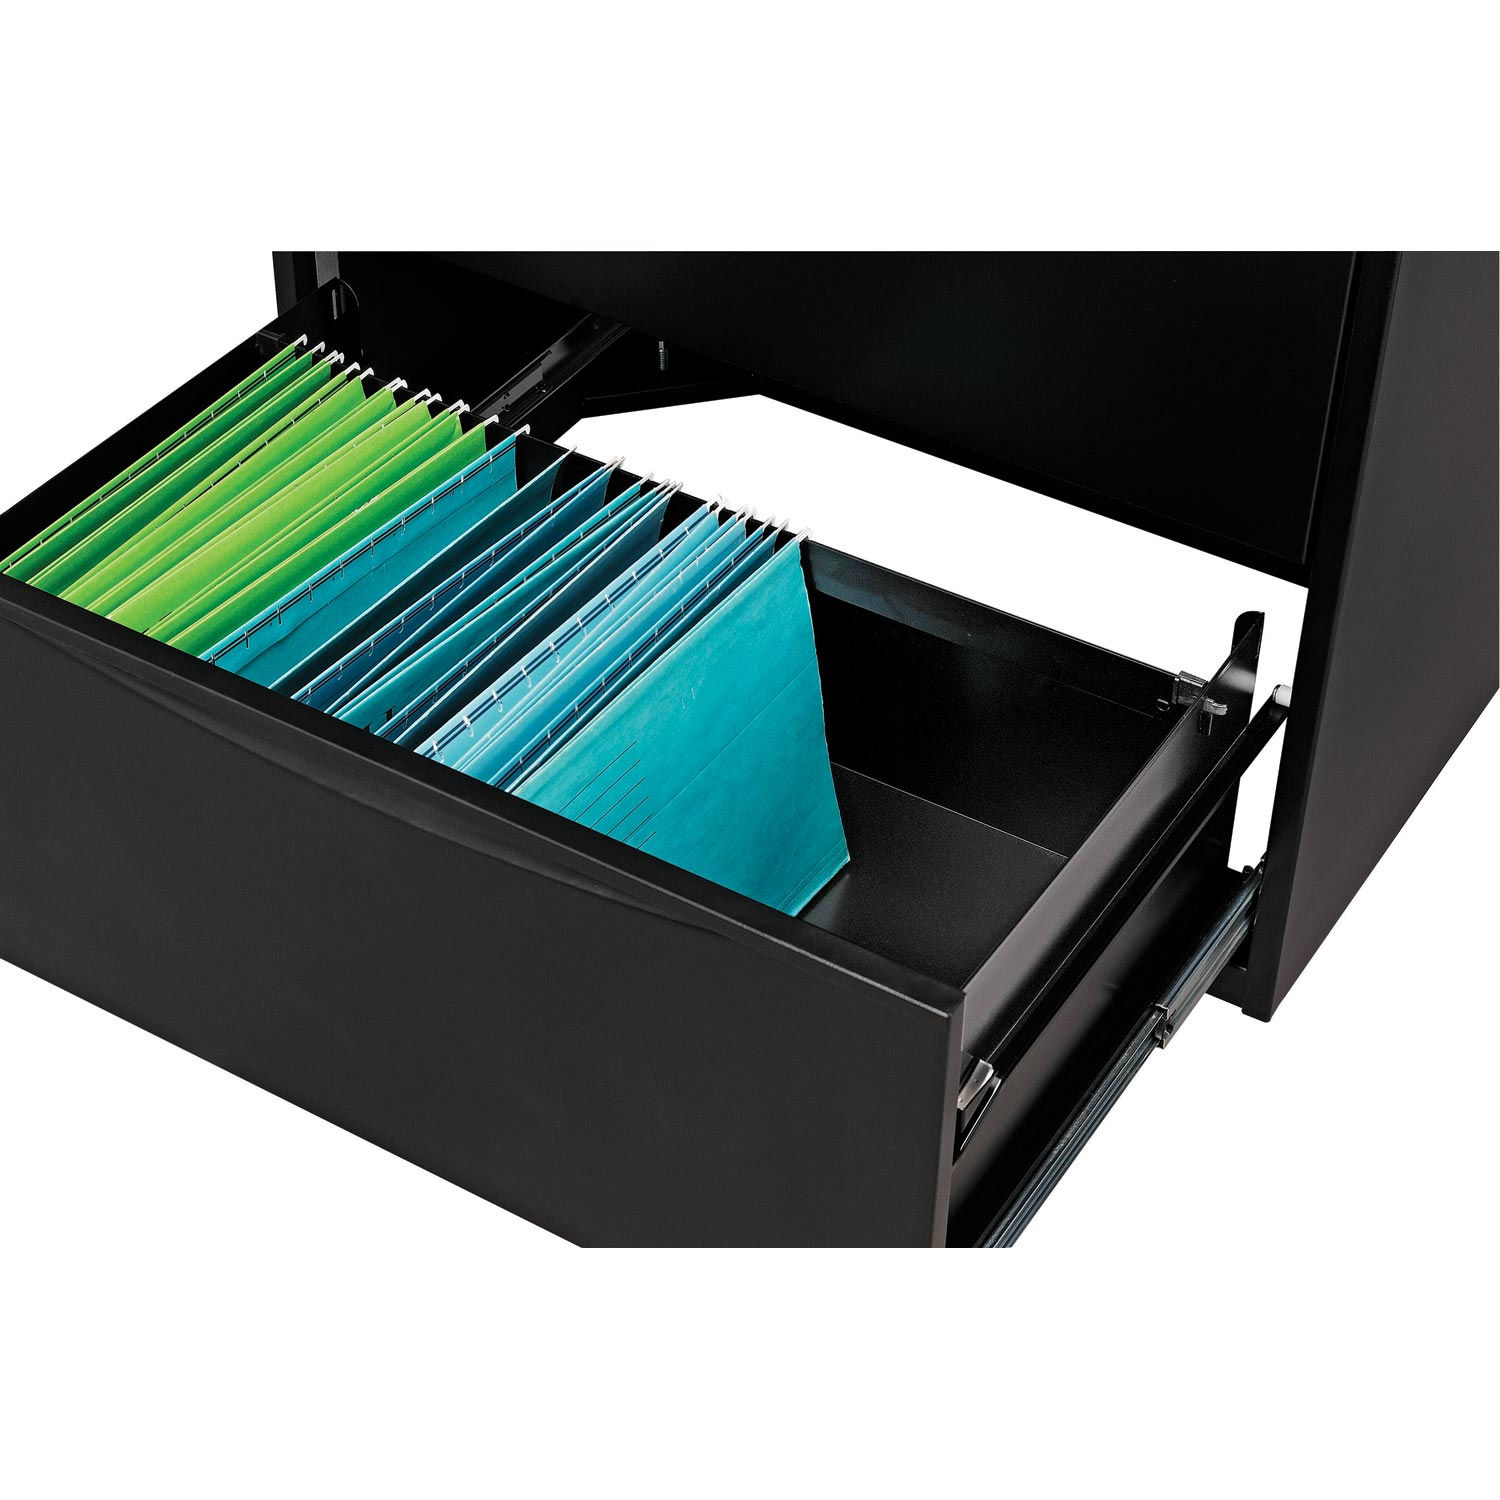 Global Industries 252468BK Interion 30 in. Premium Lateral File Cabinet 5 Drawer, Black - image 4 of 4